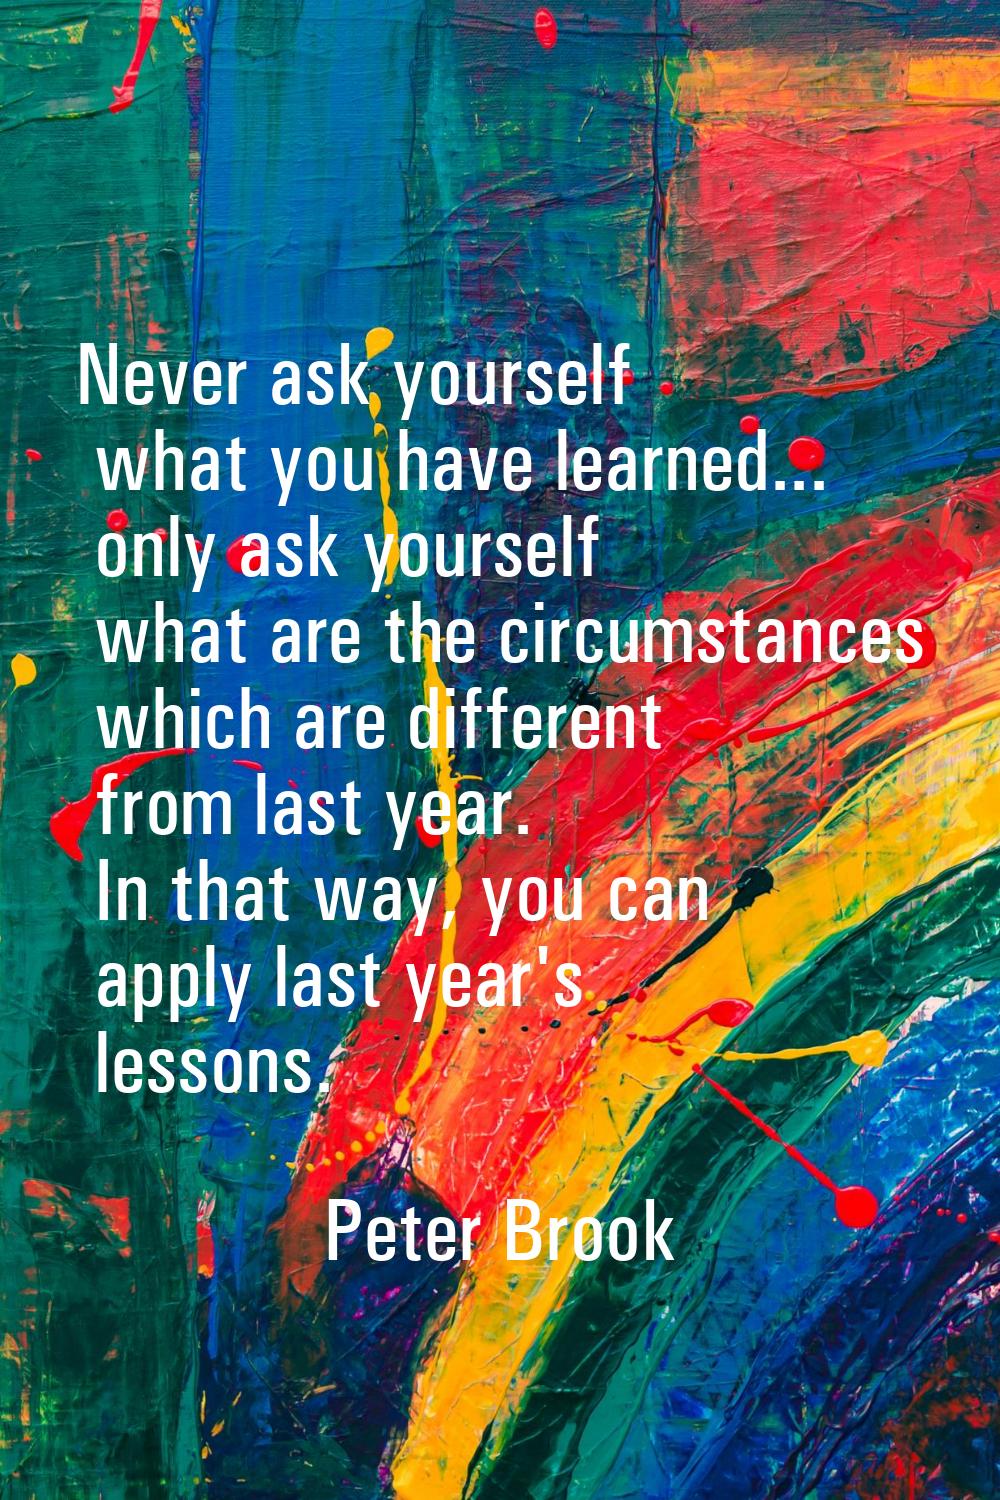 Never ask yourself what you have learned... only ask yourself what are the circumstances which are 